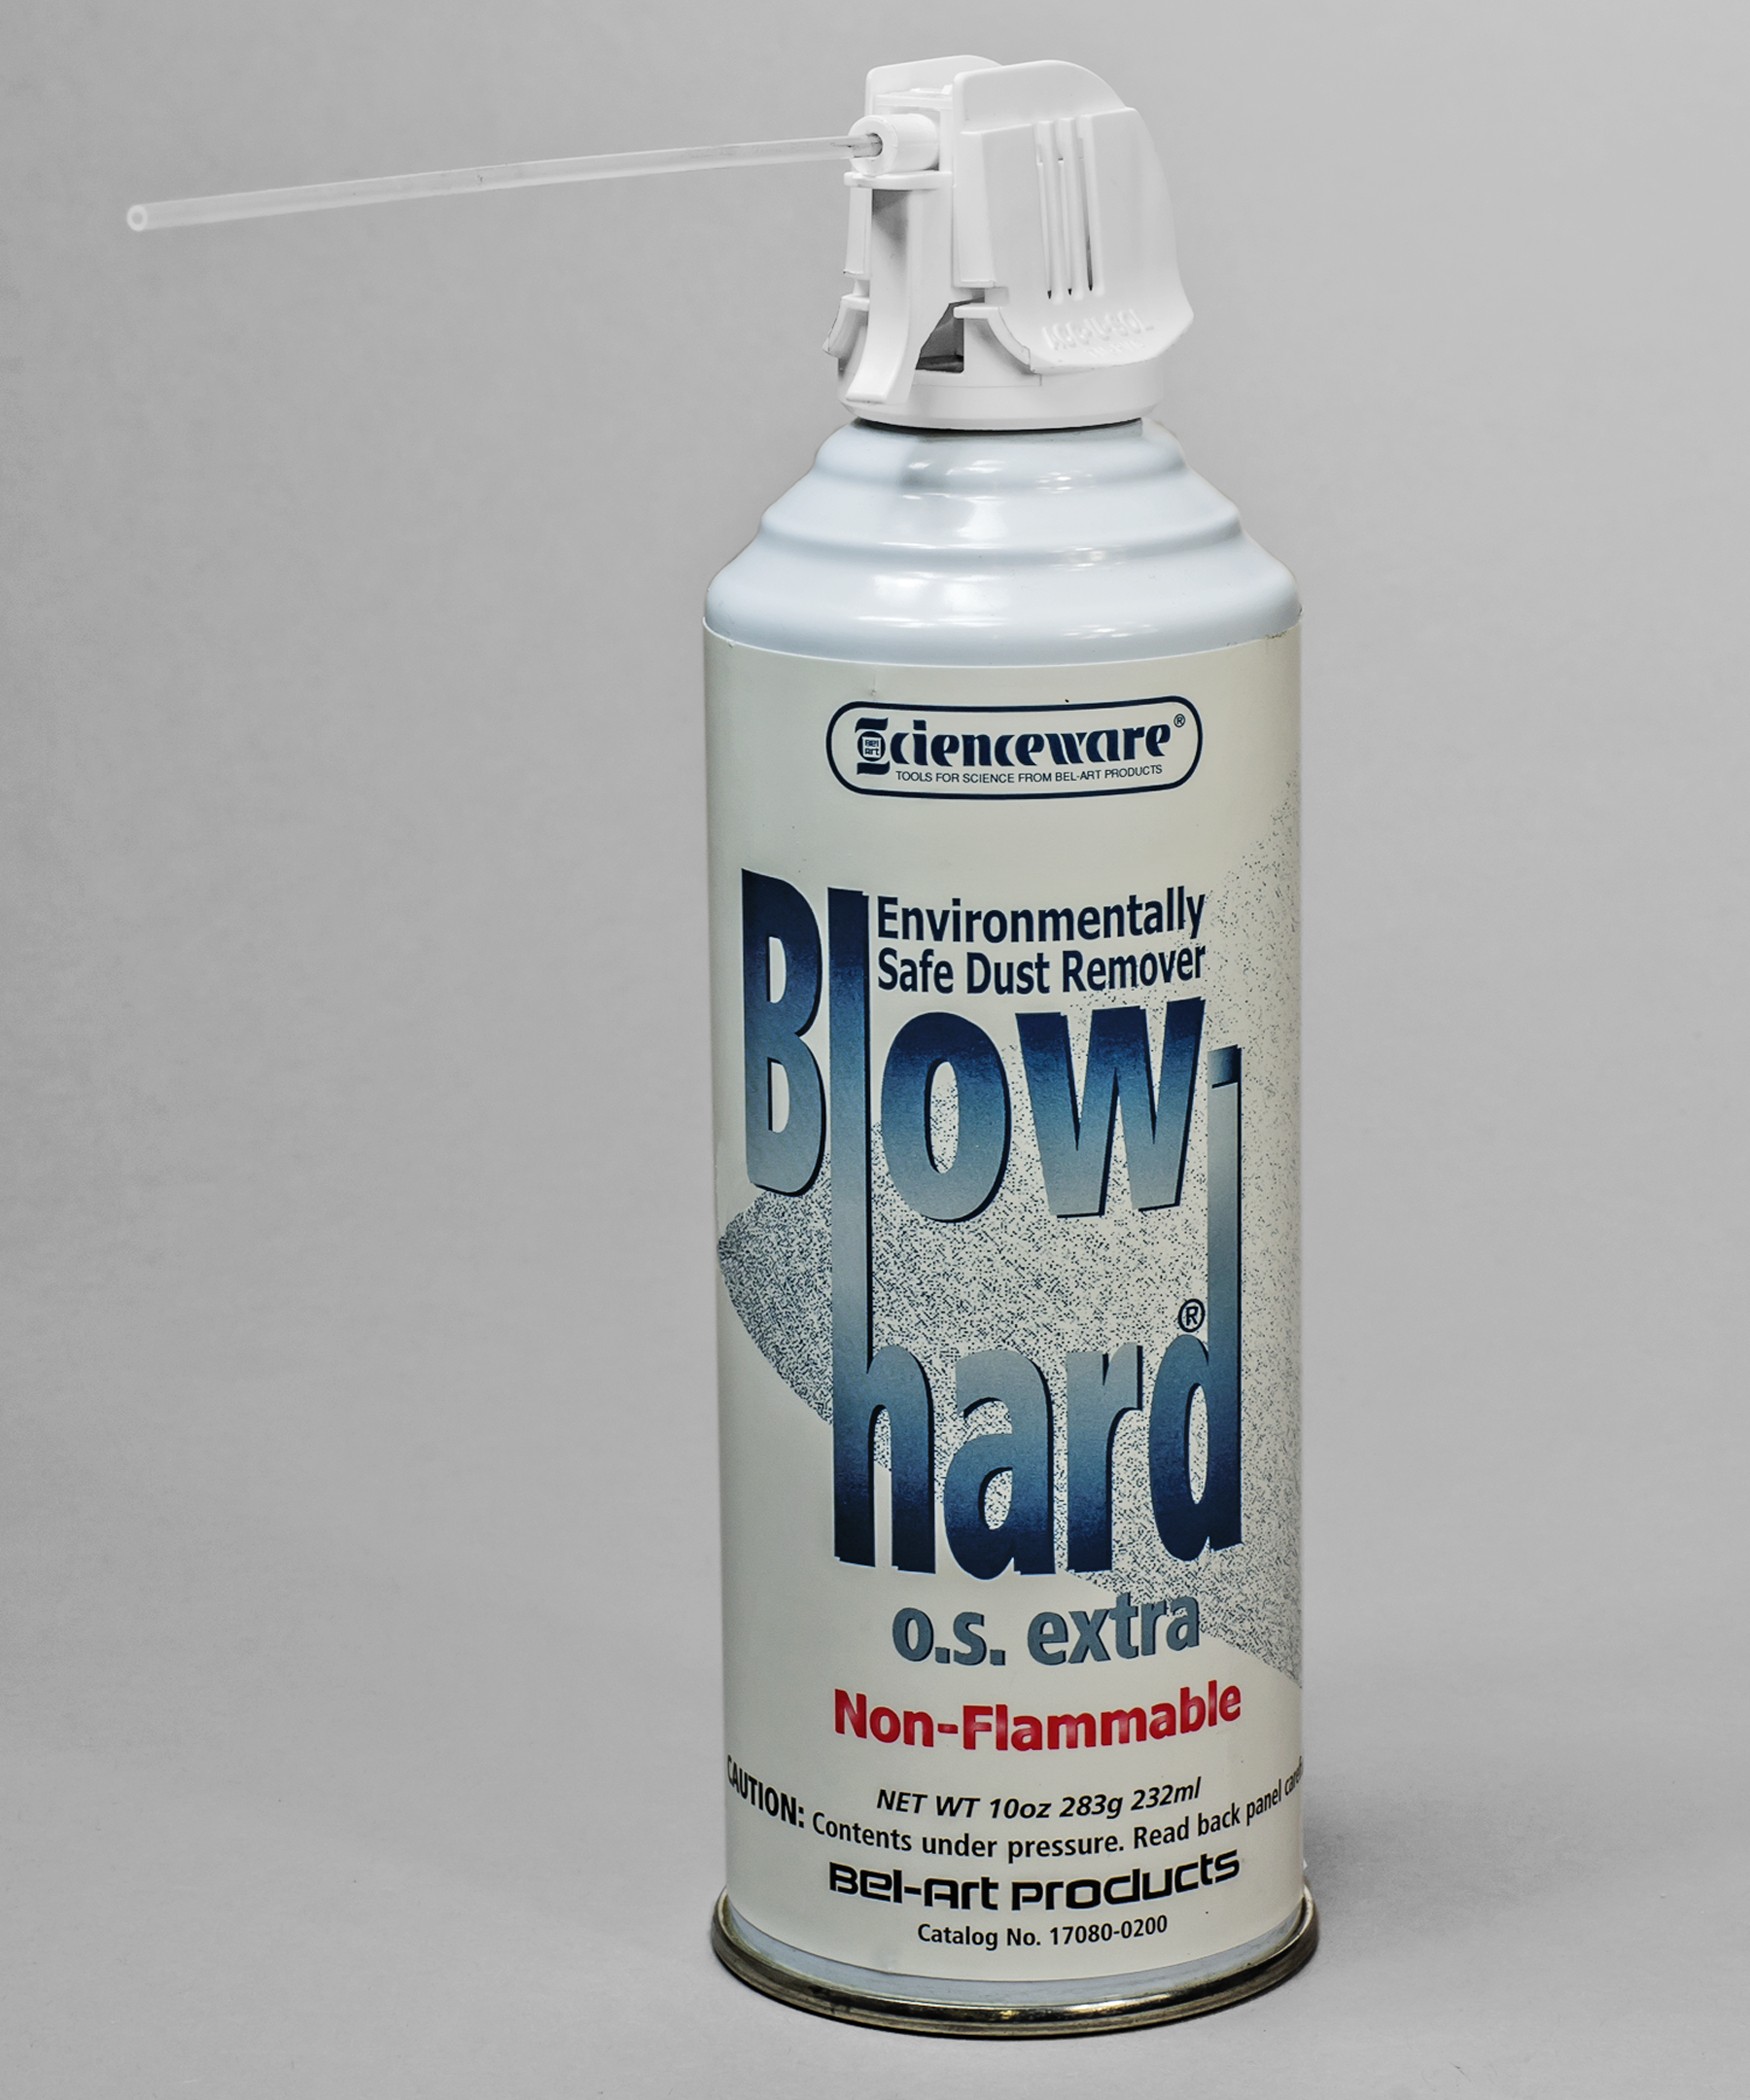 SP Bel-Art, Blow-Hard O.S. Extra Dust Remover